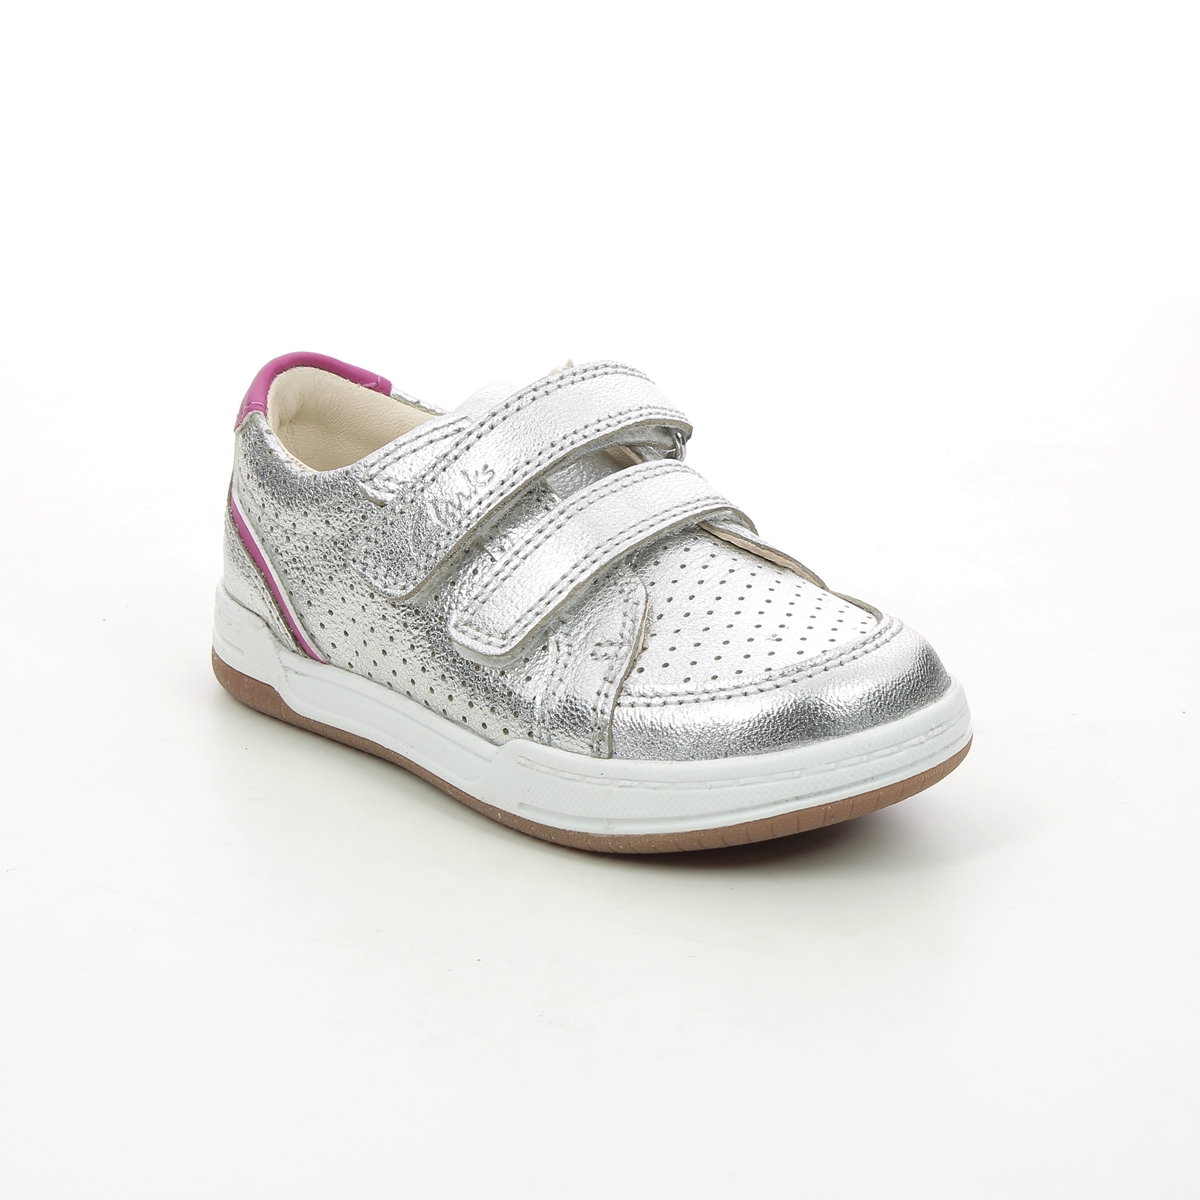 Clarks Fawn Solo T F first shoes